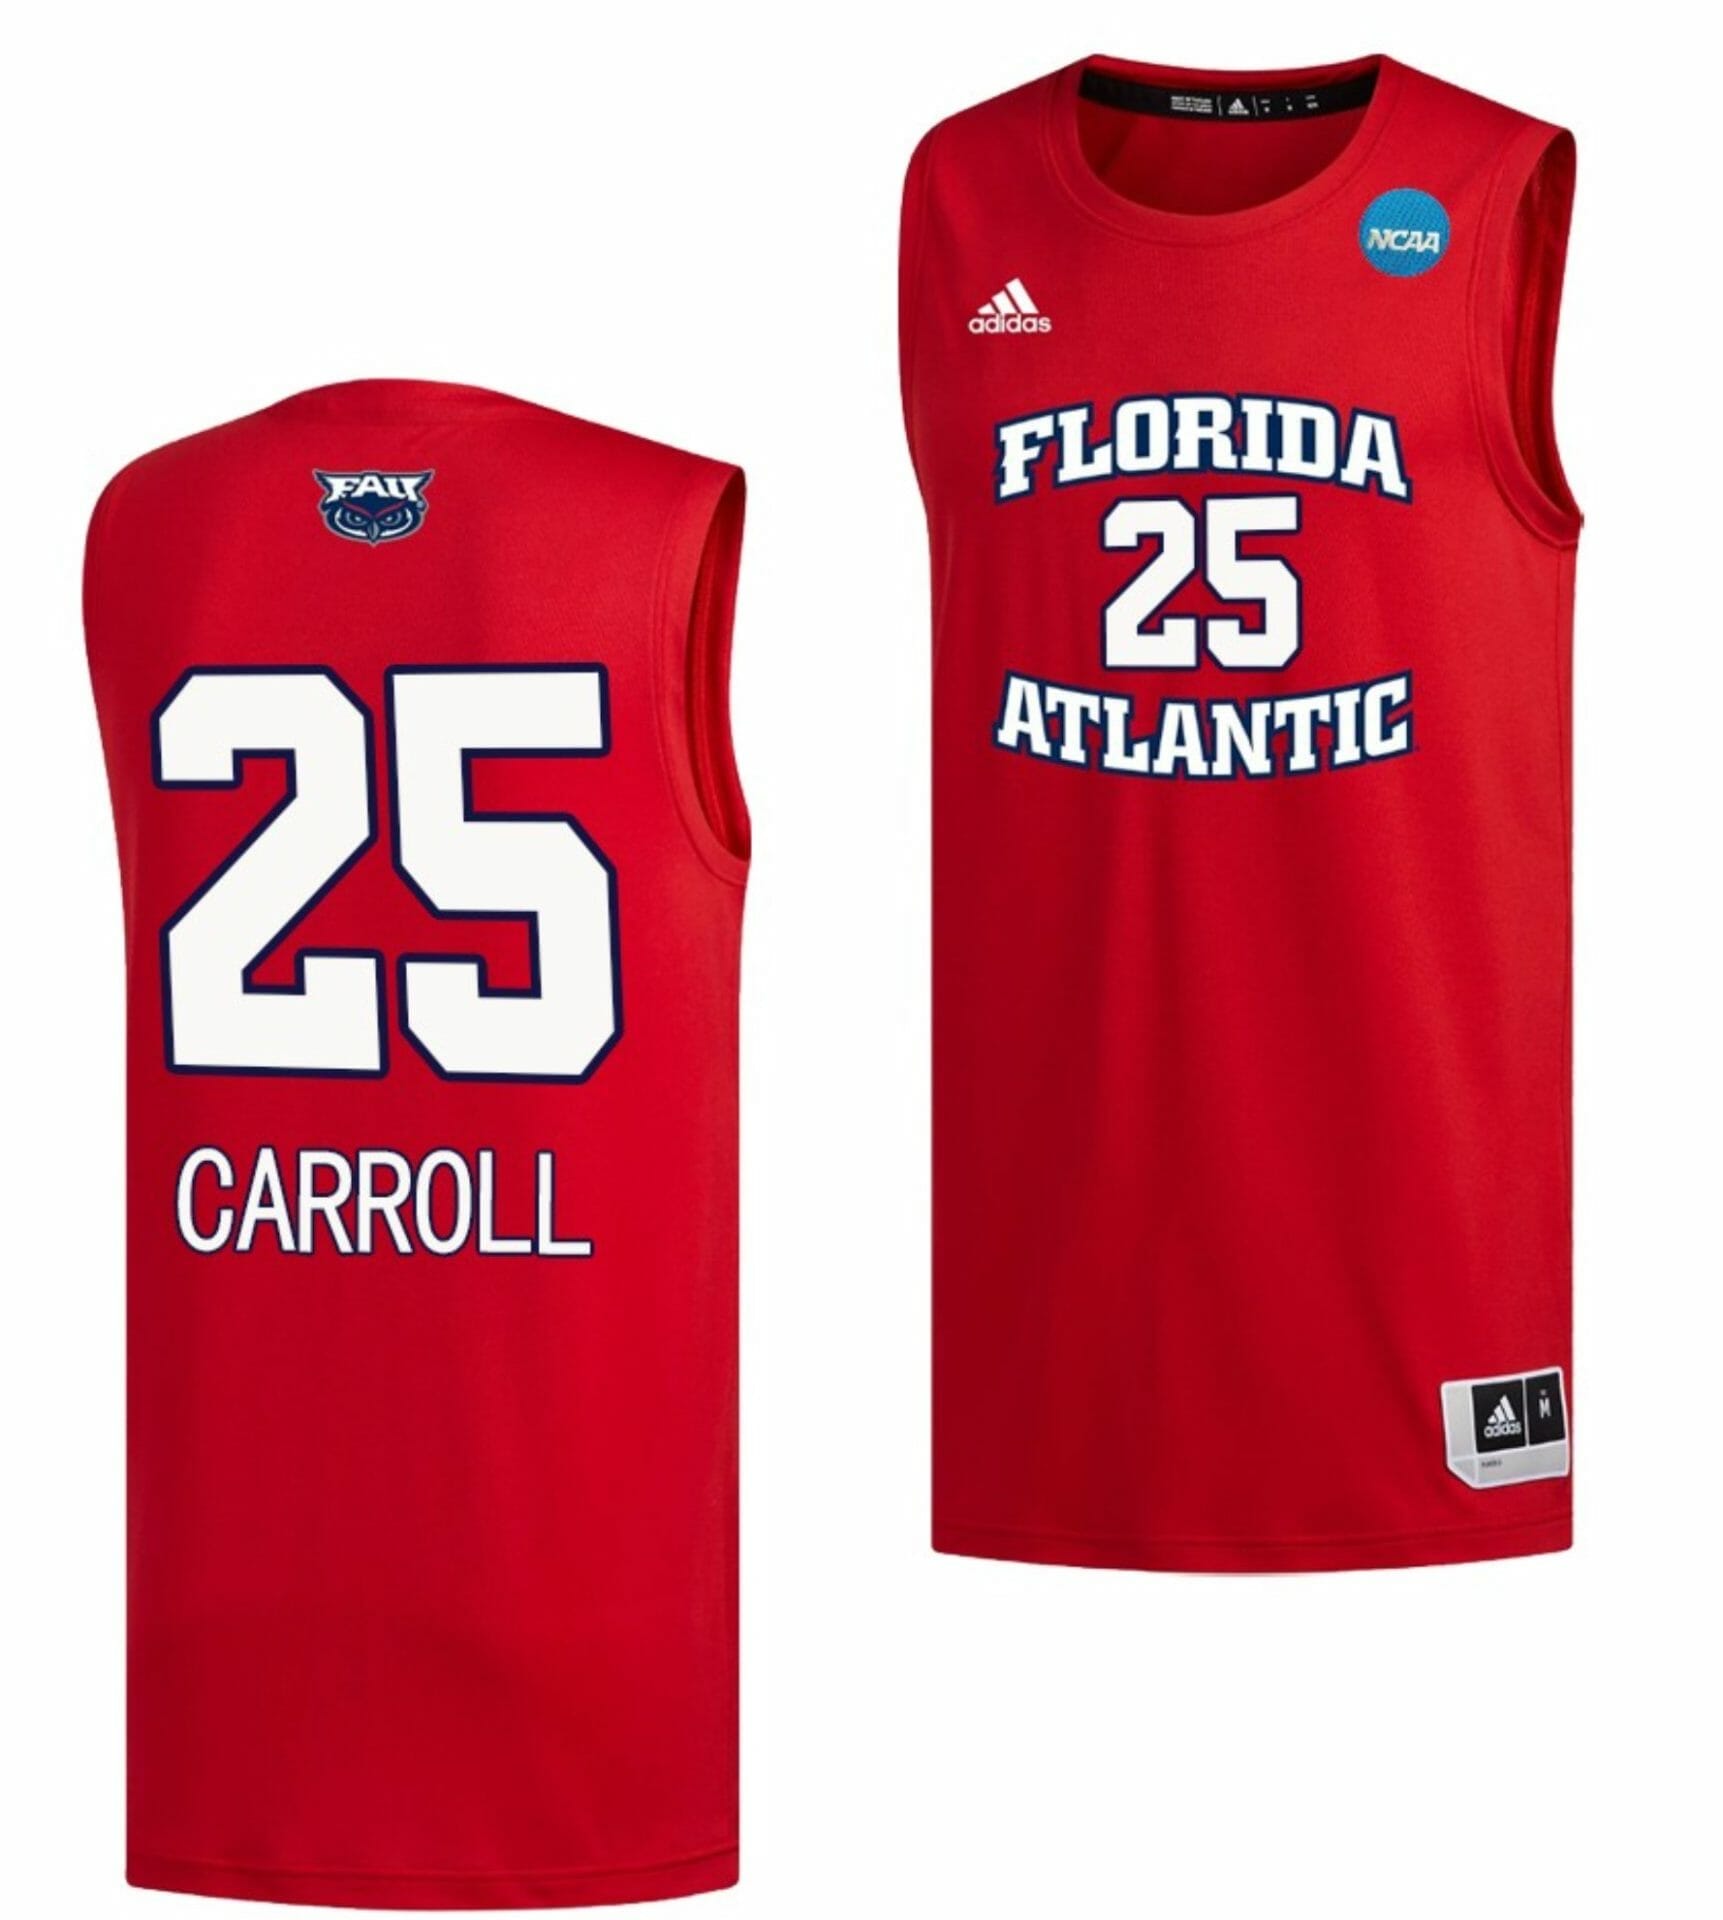 Available] Get New Tre Carroll Jersey #25